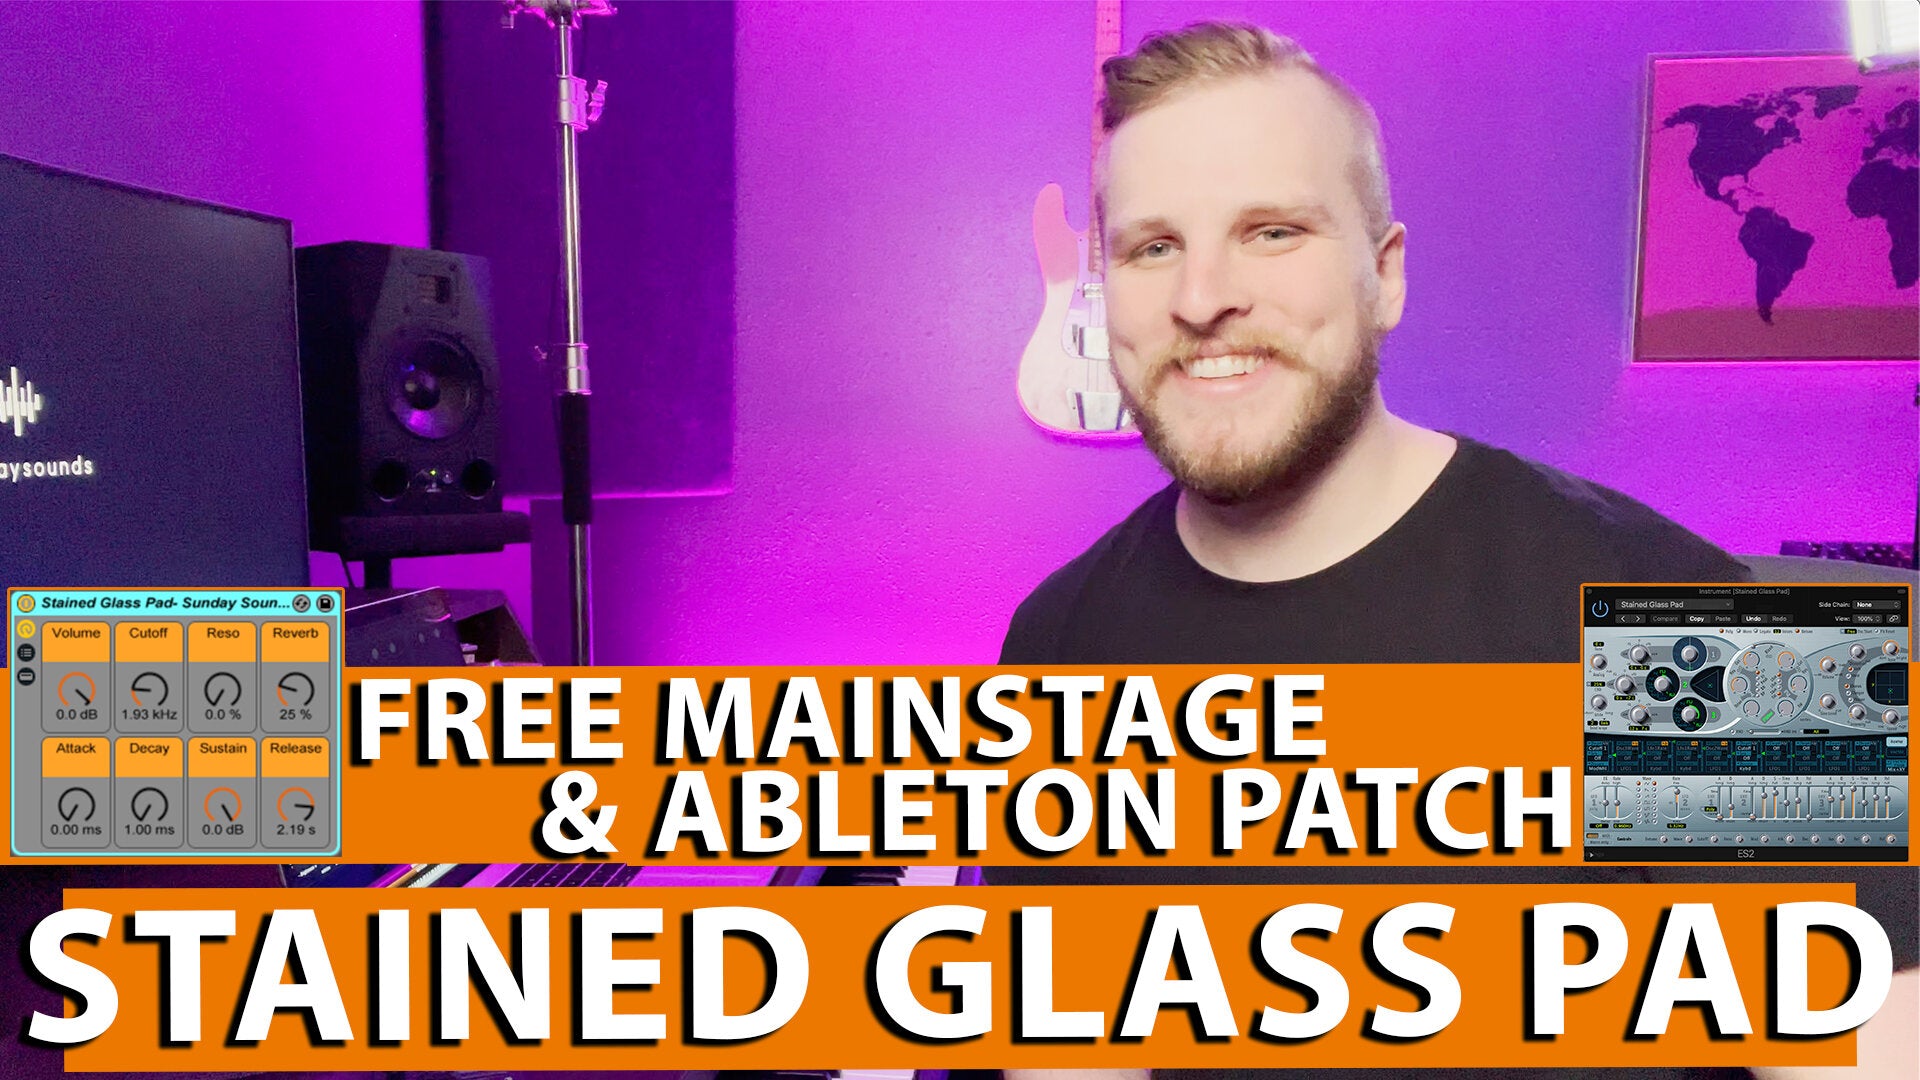 Free MainStage & Ableton Worship Patch! - Stained Glass Pad